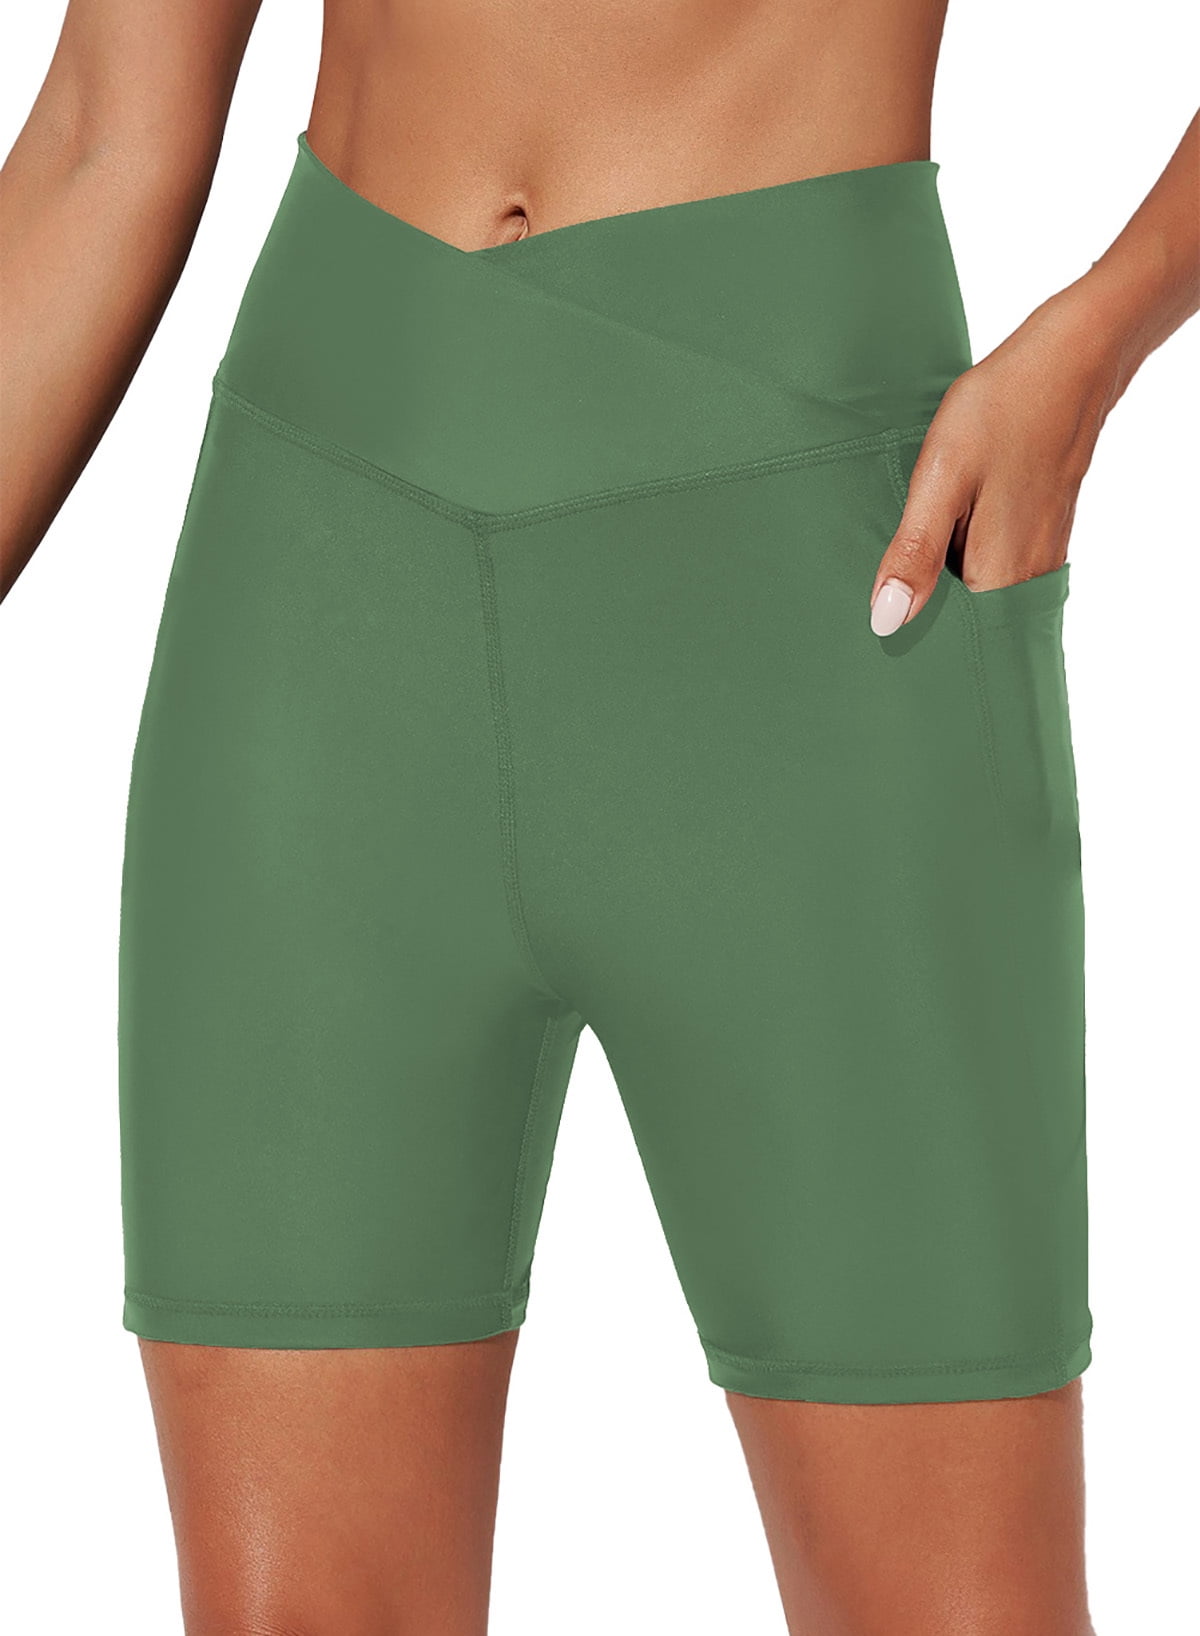 Swim Shorts with Waistband and Tummy Control